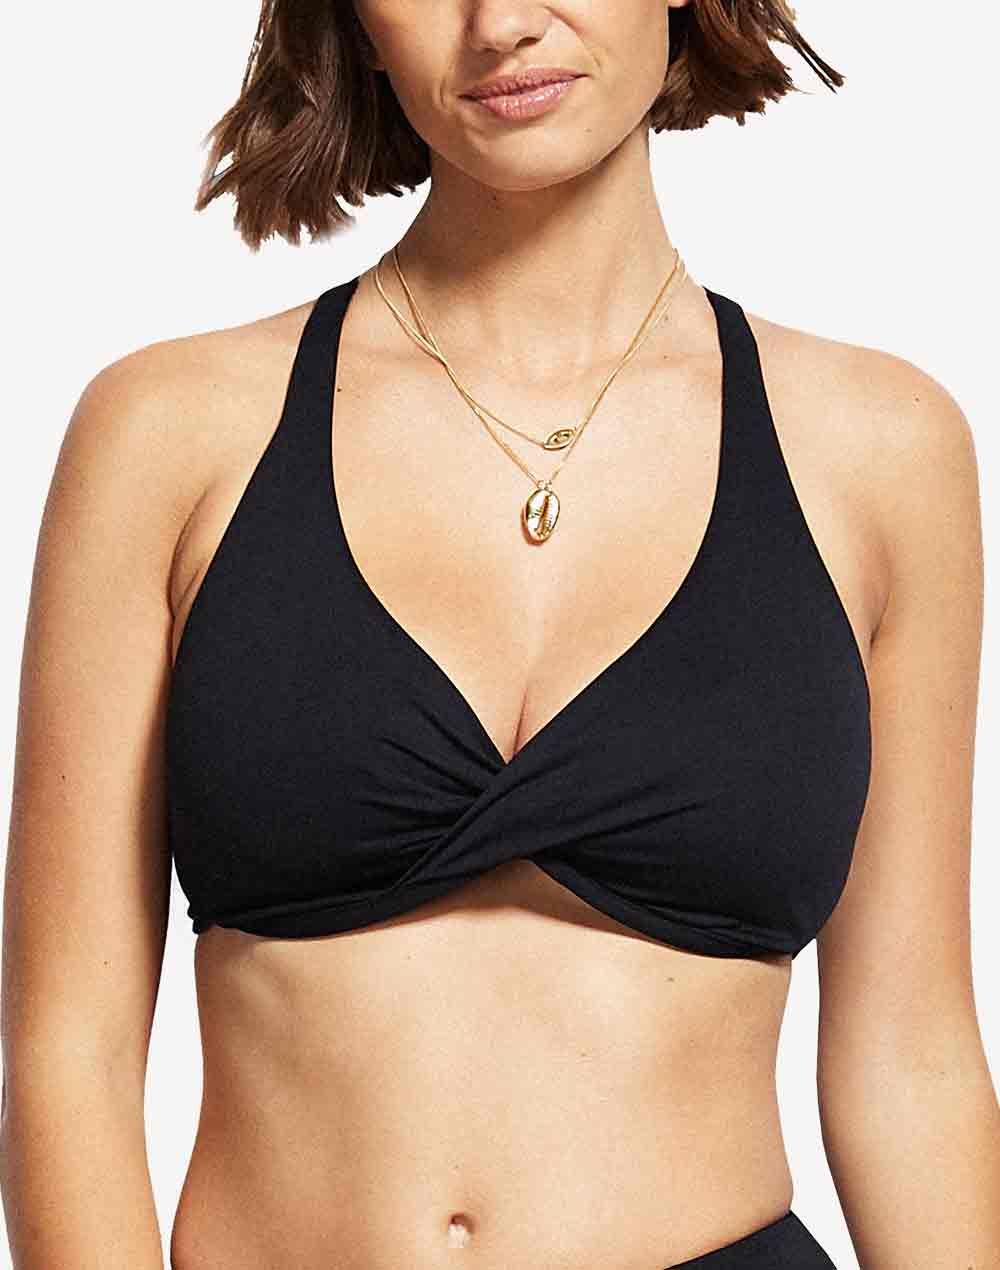 Seafolly Women's F Cup Halter Bikini Top Swimsuit with Underwire